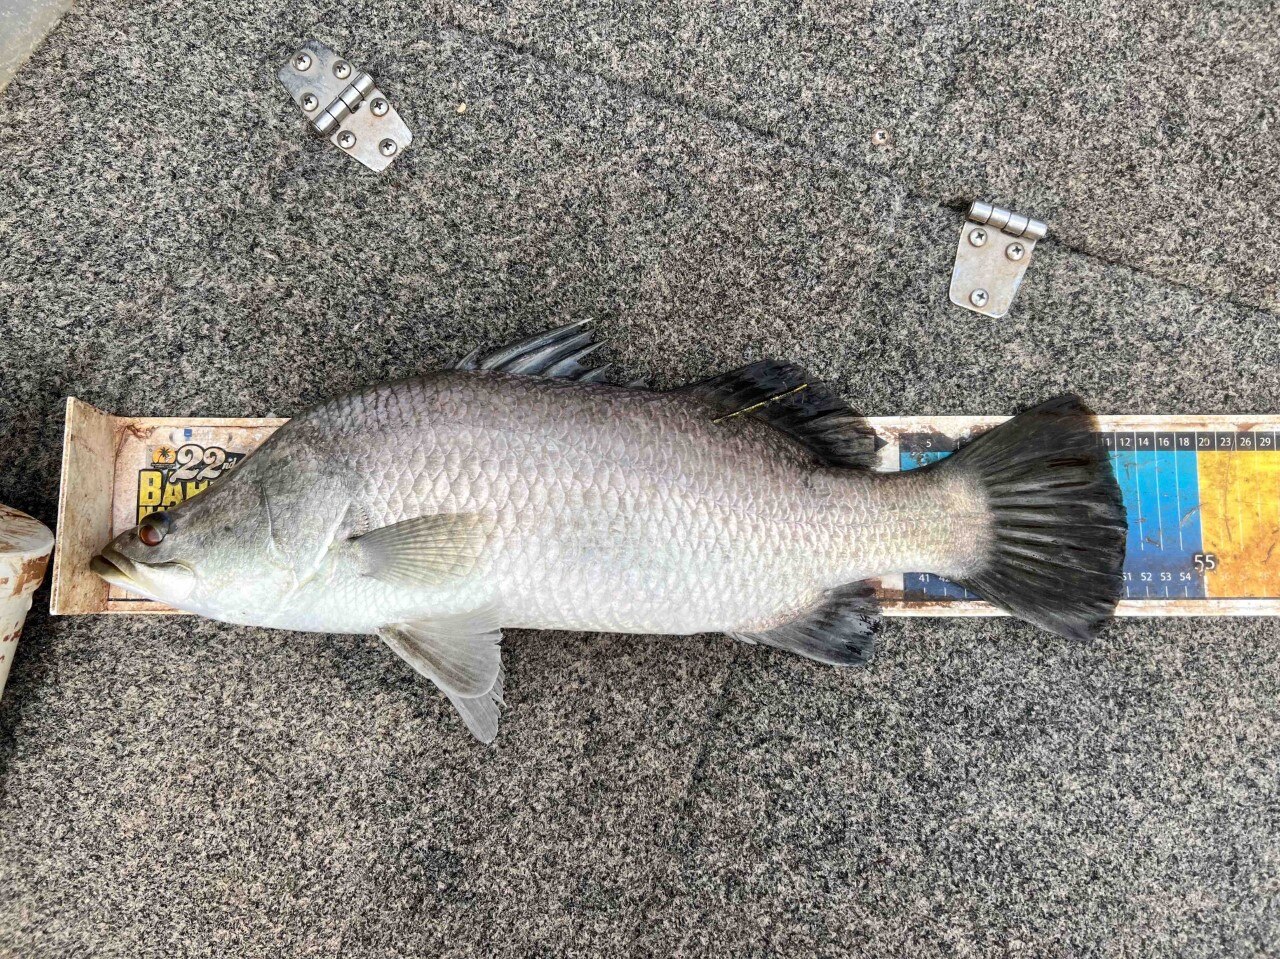 Large silver barramundi with red eyes and yellow tag.